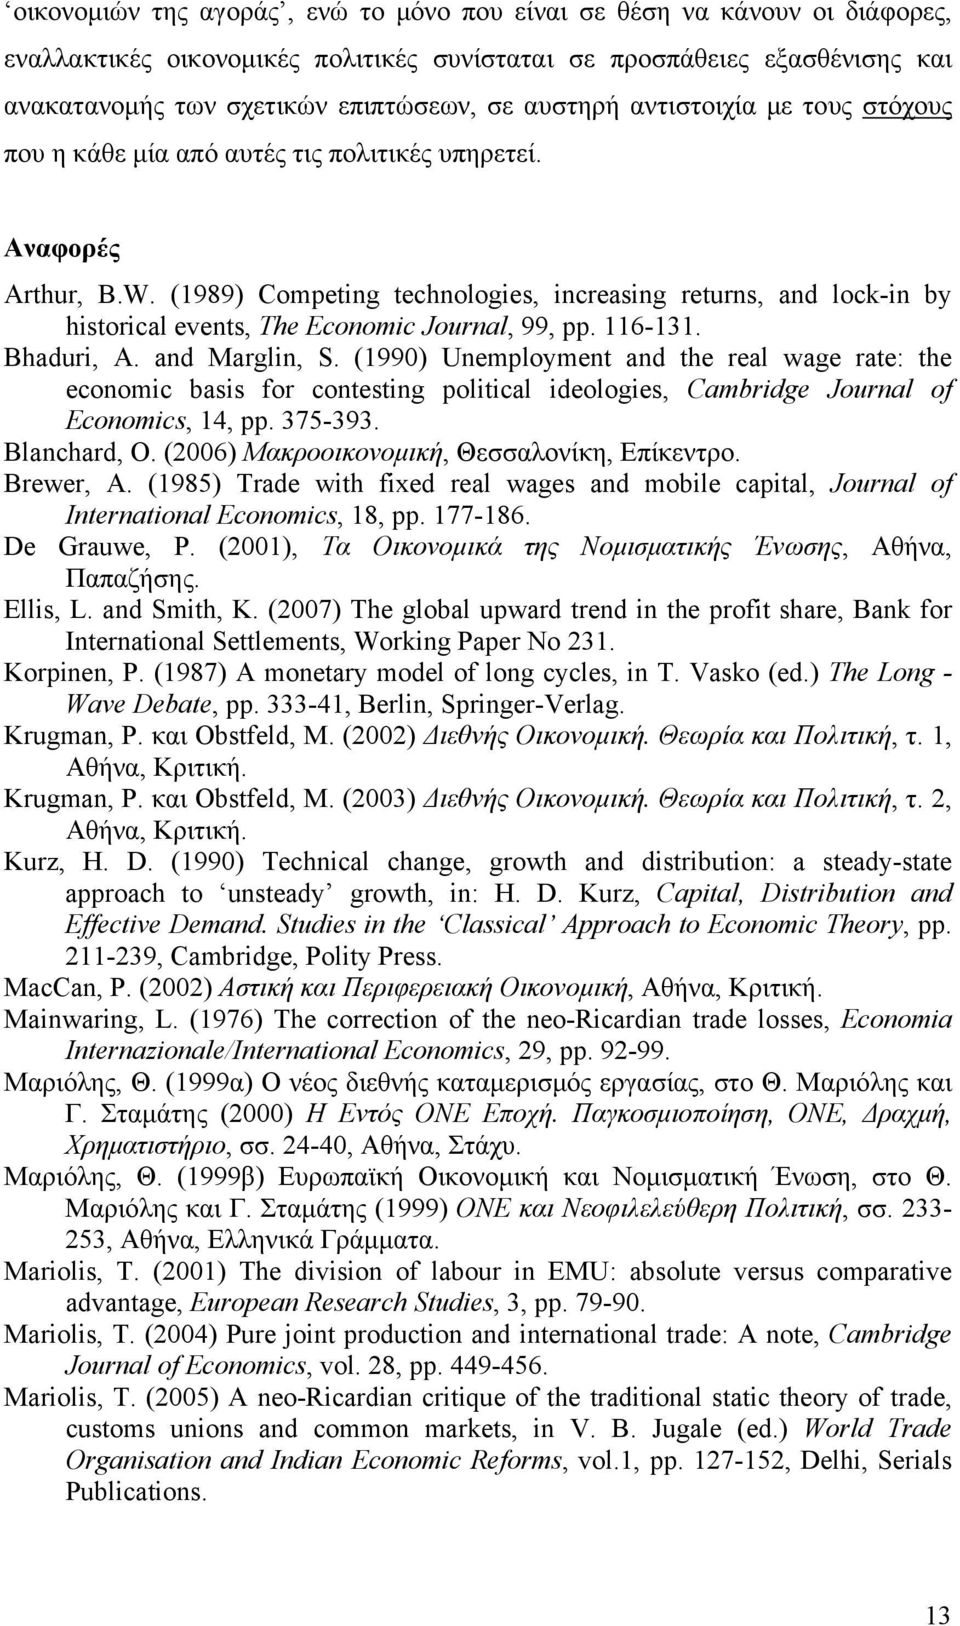 (1989) Competing technologies, increasing returns, and lock-in by historical events, The Economic Journal, 99, pp. 116-131. Bhaduri, A. and Marglin, S.